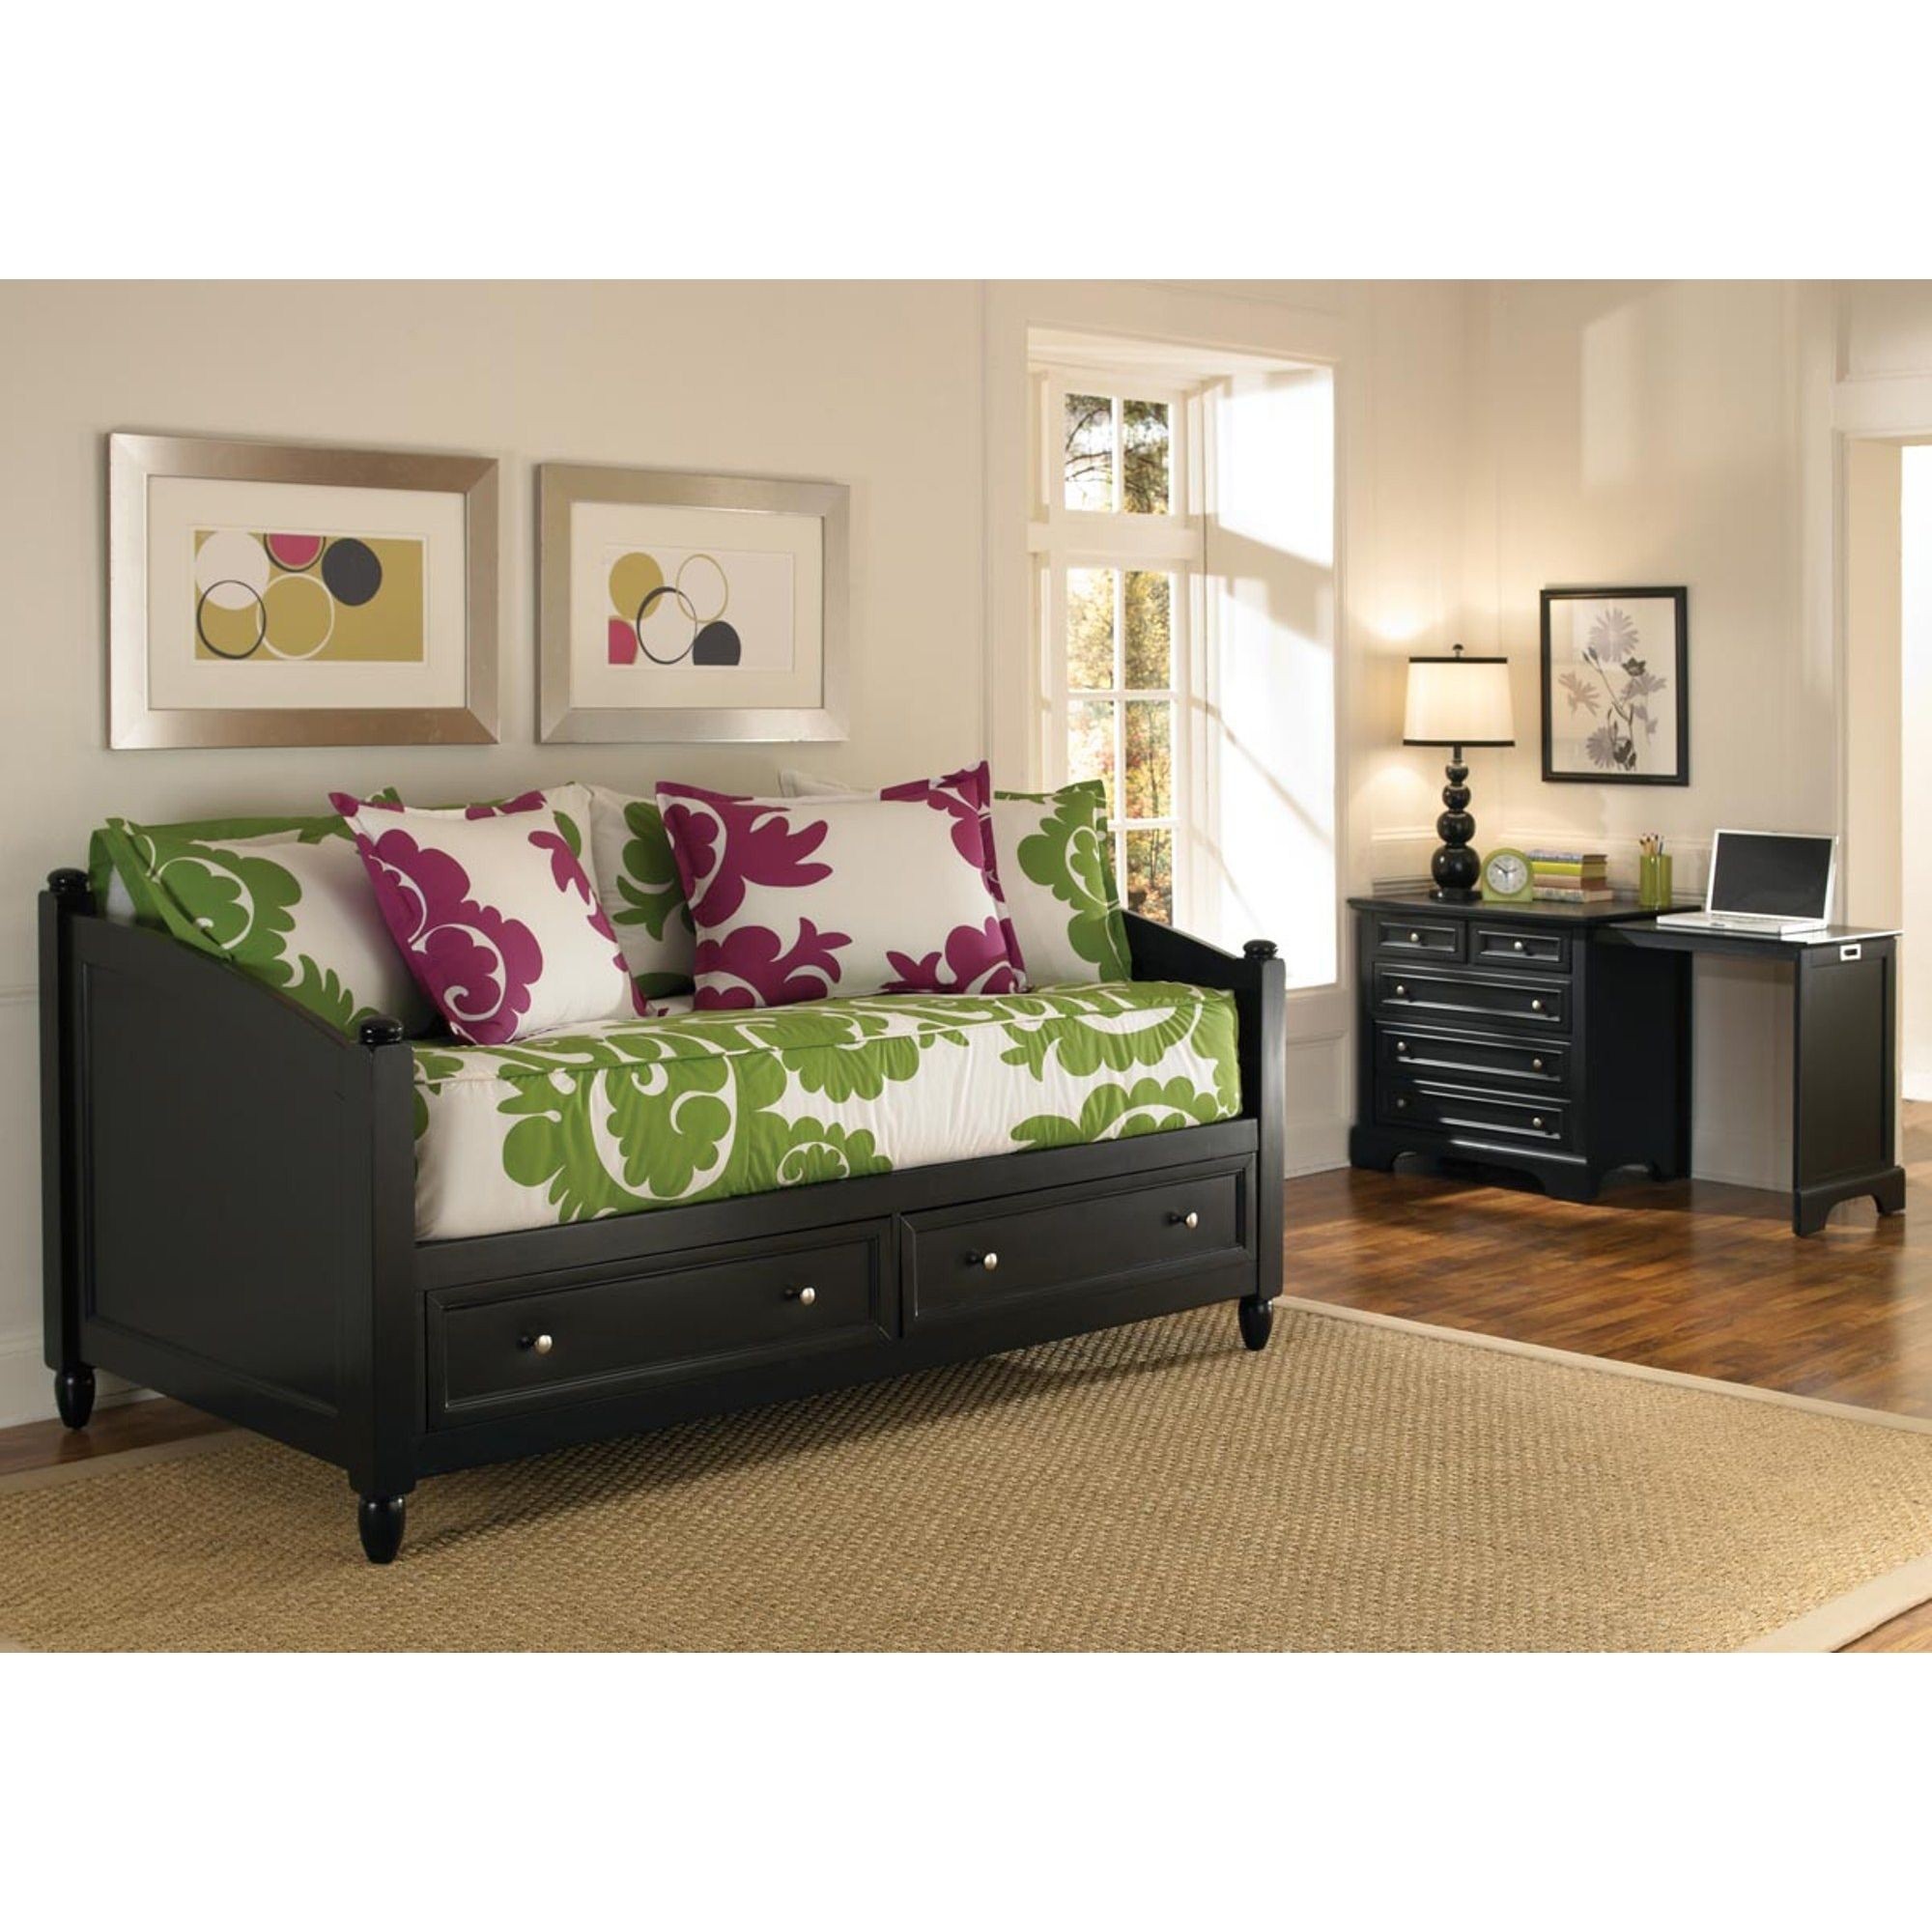 Home styles twin size bedford daybed and expand a desk